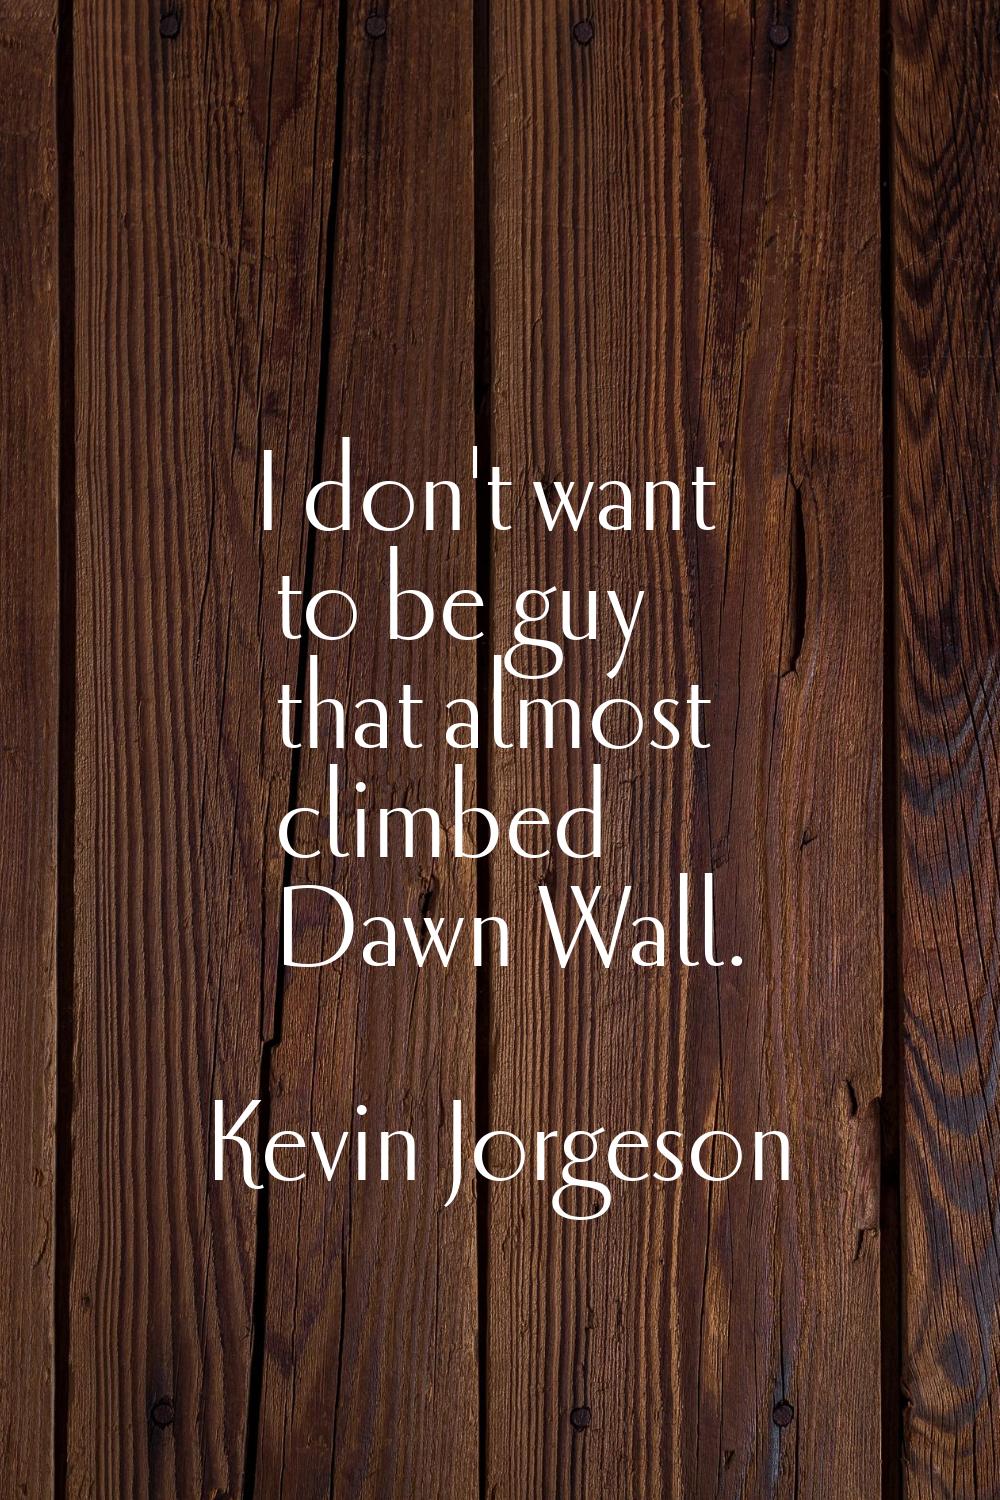 I don't want to be guy that almost climbed Dawn Wall.